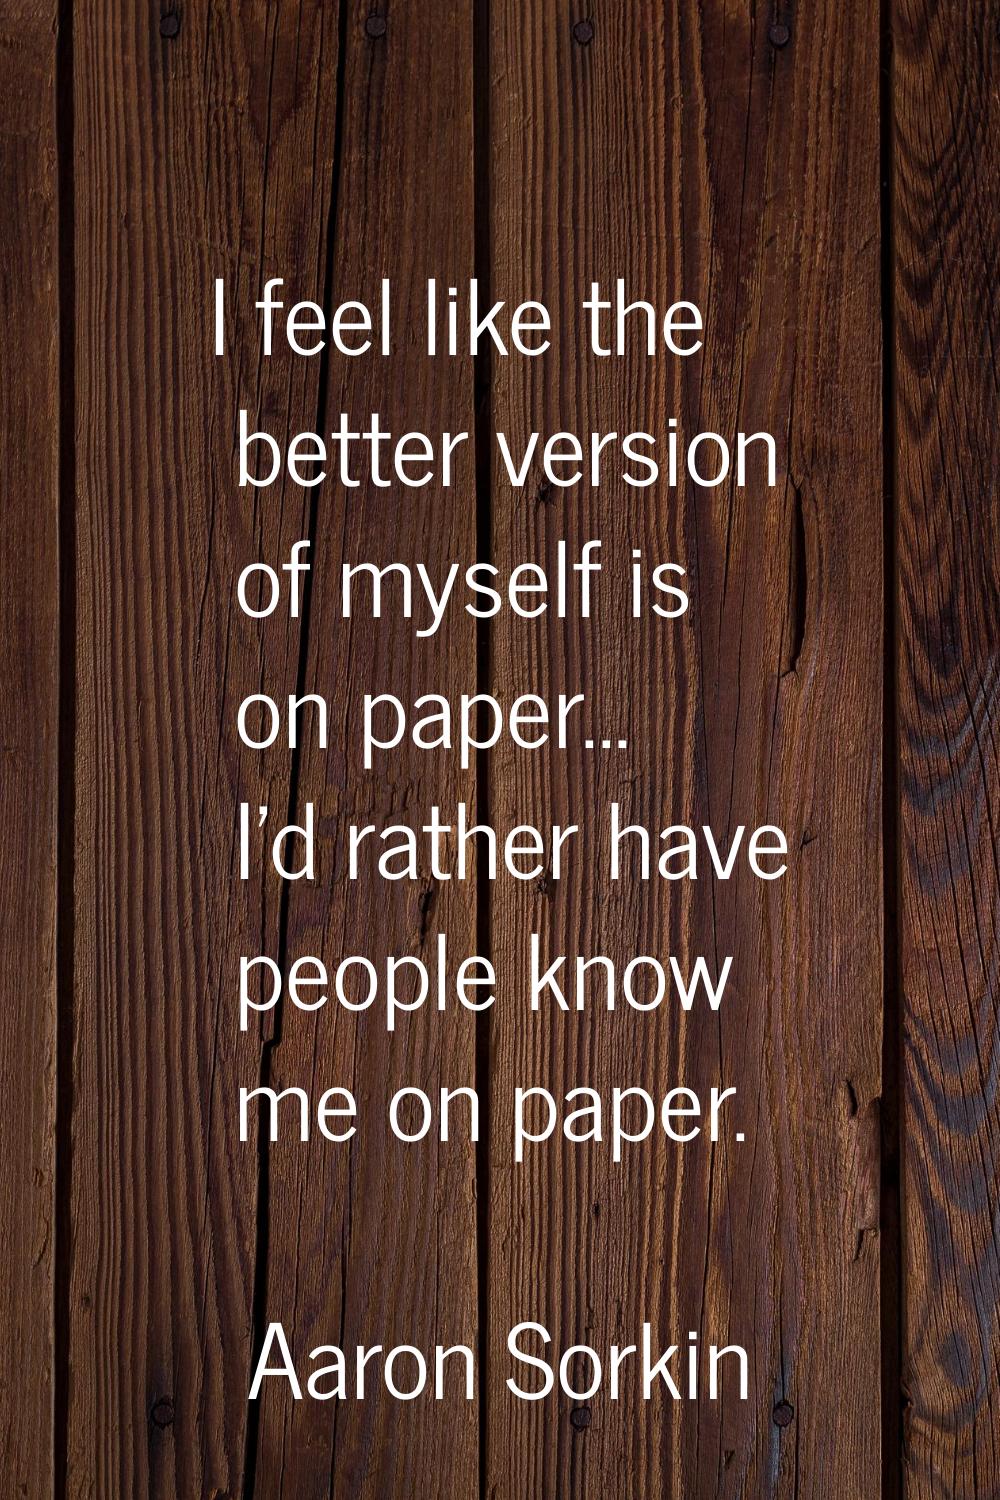 I feel like the better version of myself is on paper... I'd rather have people know me on paper.